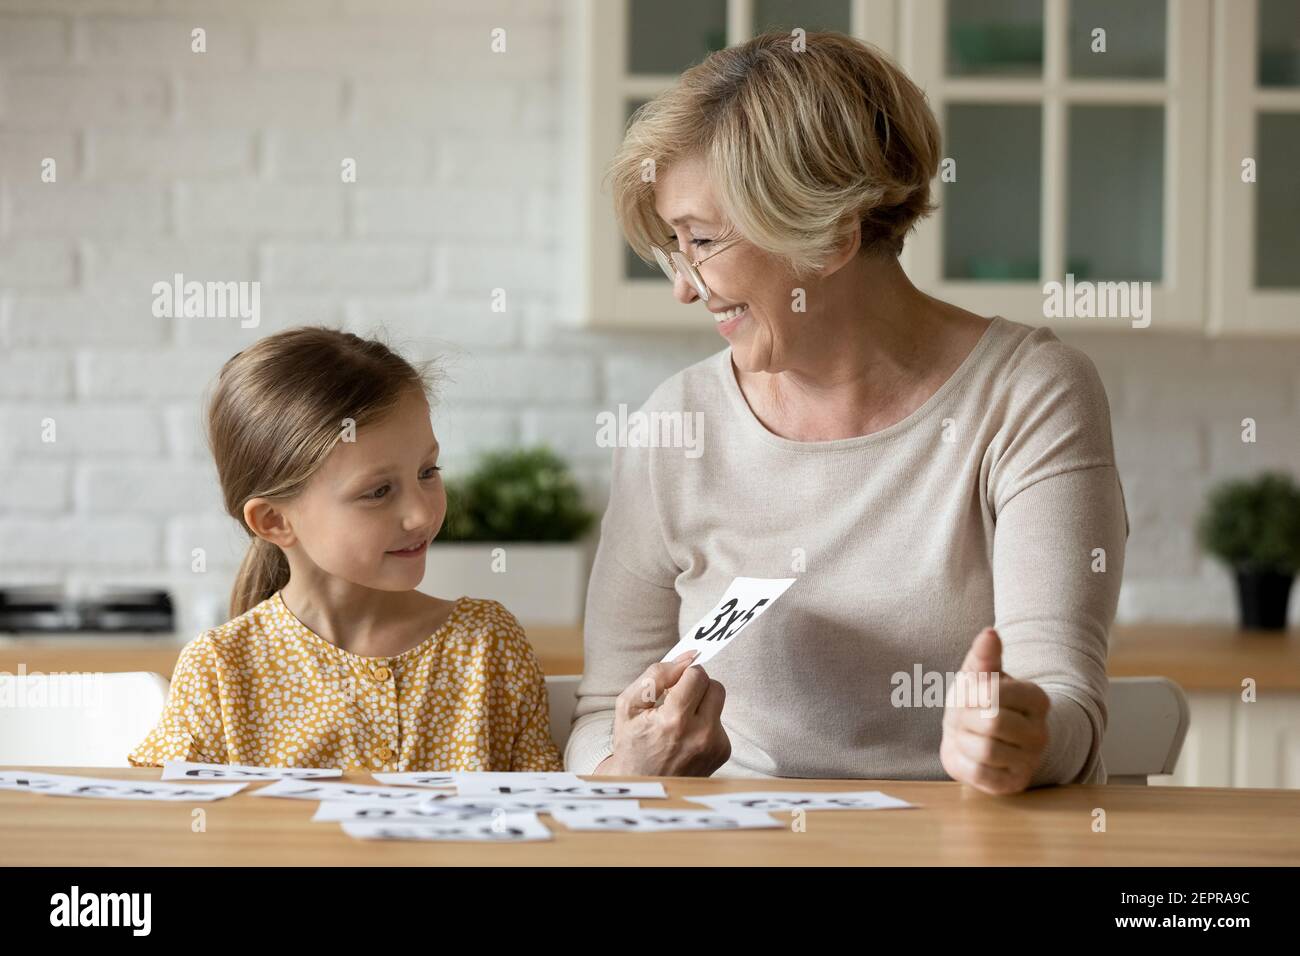 Aged woman teacher study math with pupil girl using cards Stock Photo